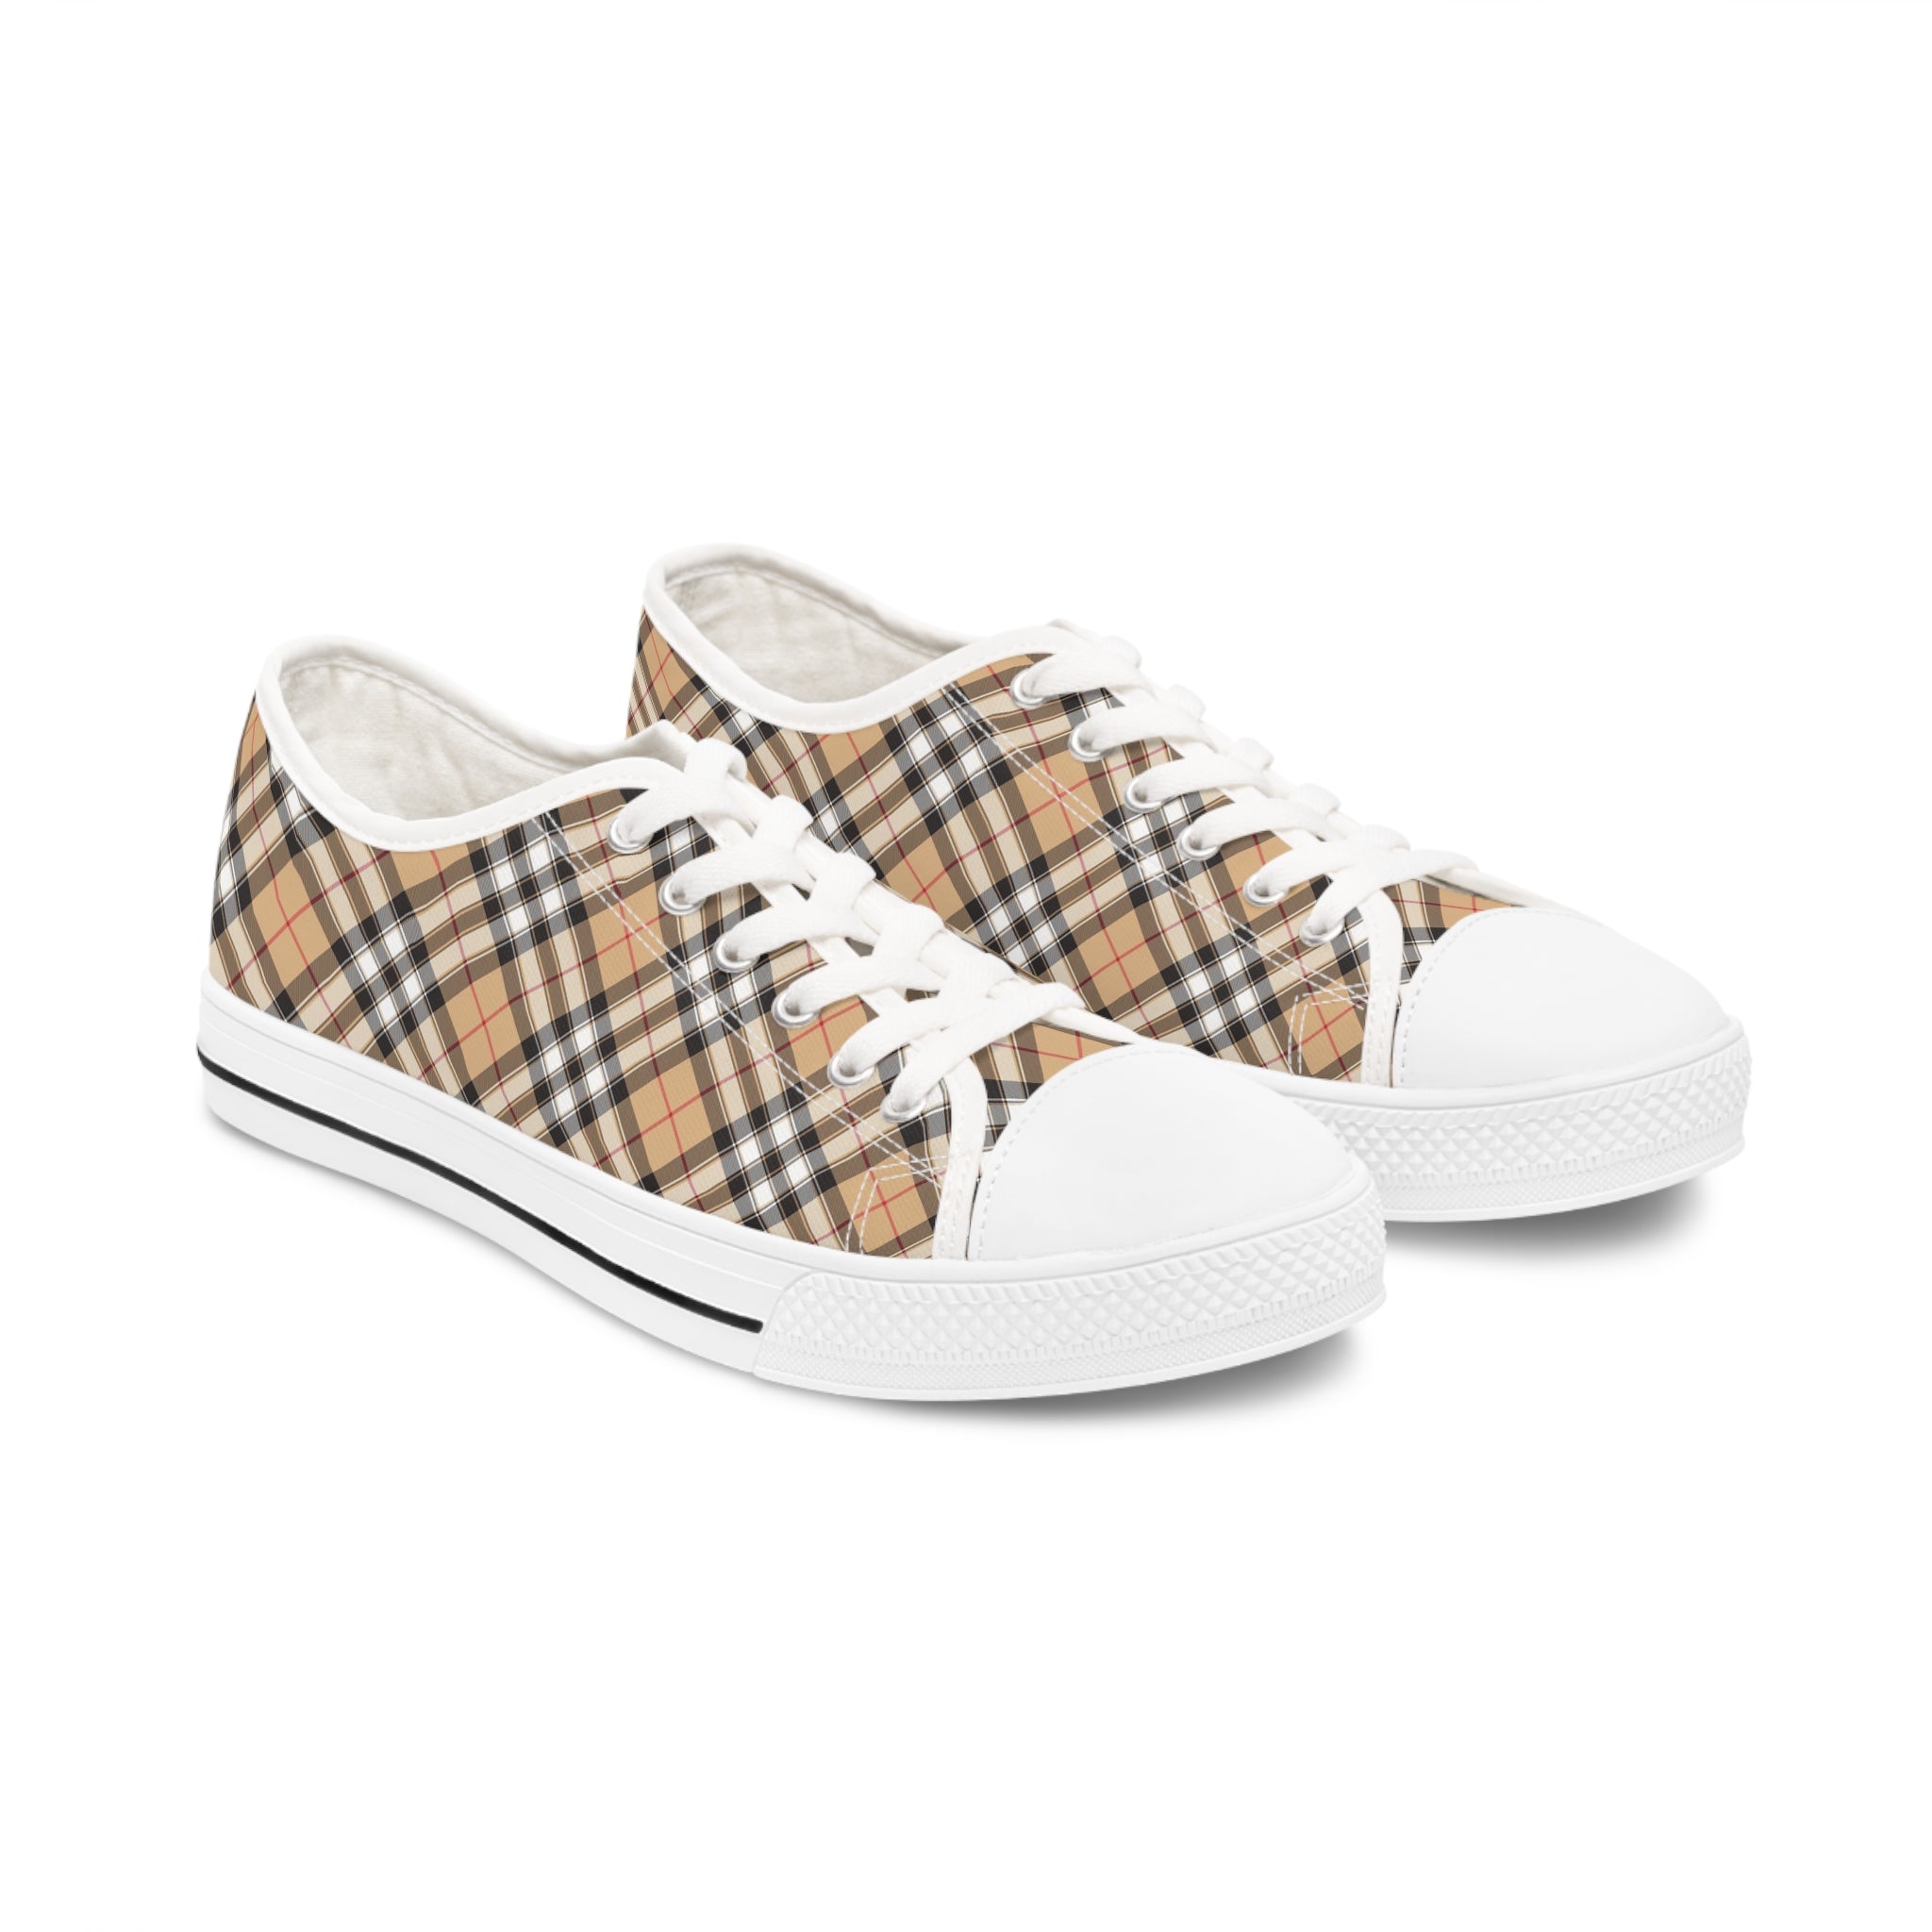  Groove Collection in Plaid (Red Stripe) Women's Low Top White Canvas Shoes ShoesUS12Whitesole